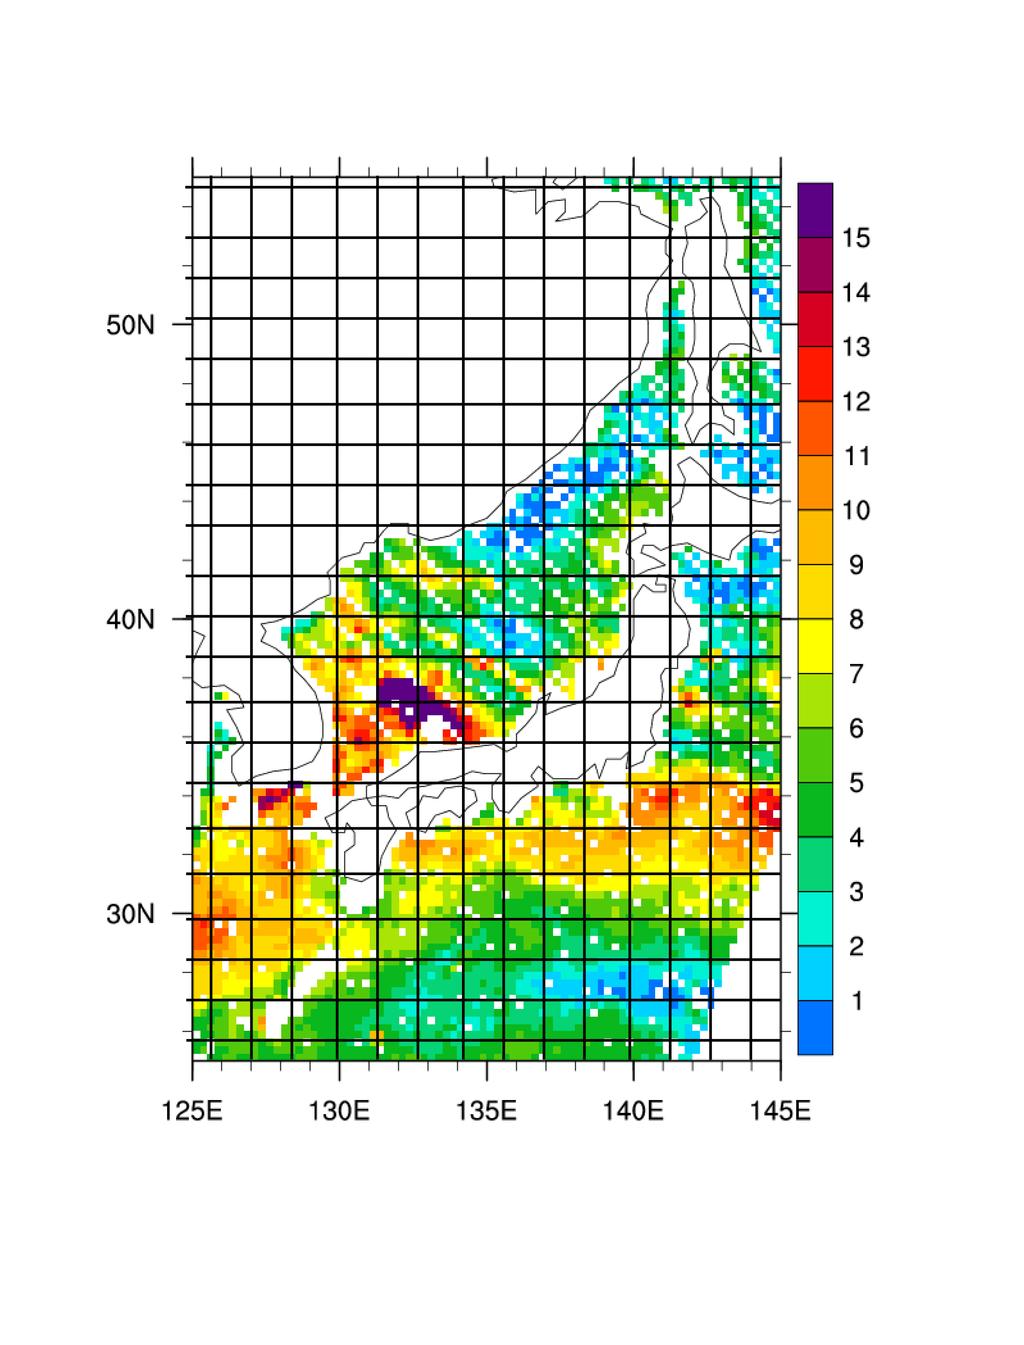 Sub-Gridscale (SGS) Winds Average spatial and temporal wind speed distribution. (Frontal Air-Sea Interaction Experiment (FASINEX): 15minute periods, 5 buoys over ~40x40km, ~1 day) QuikSCAT (0.25 x0.